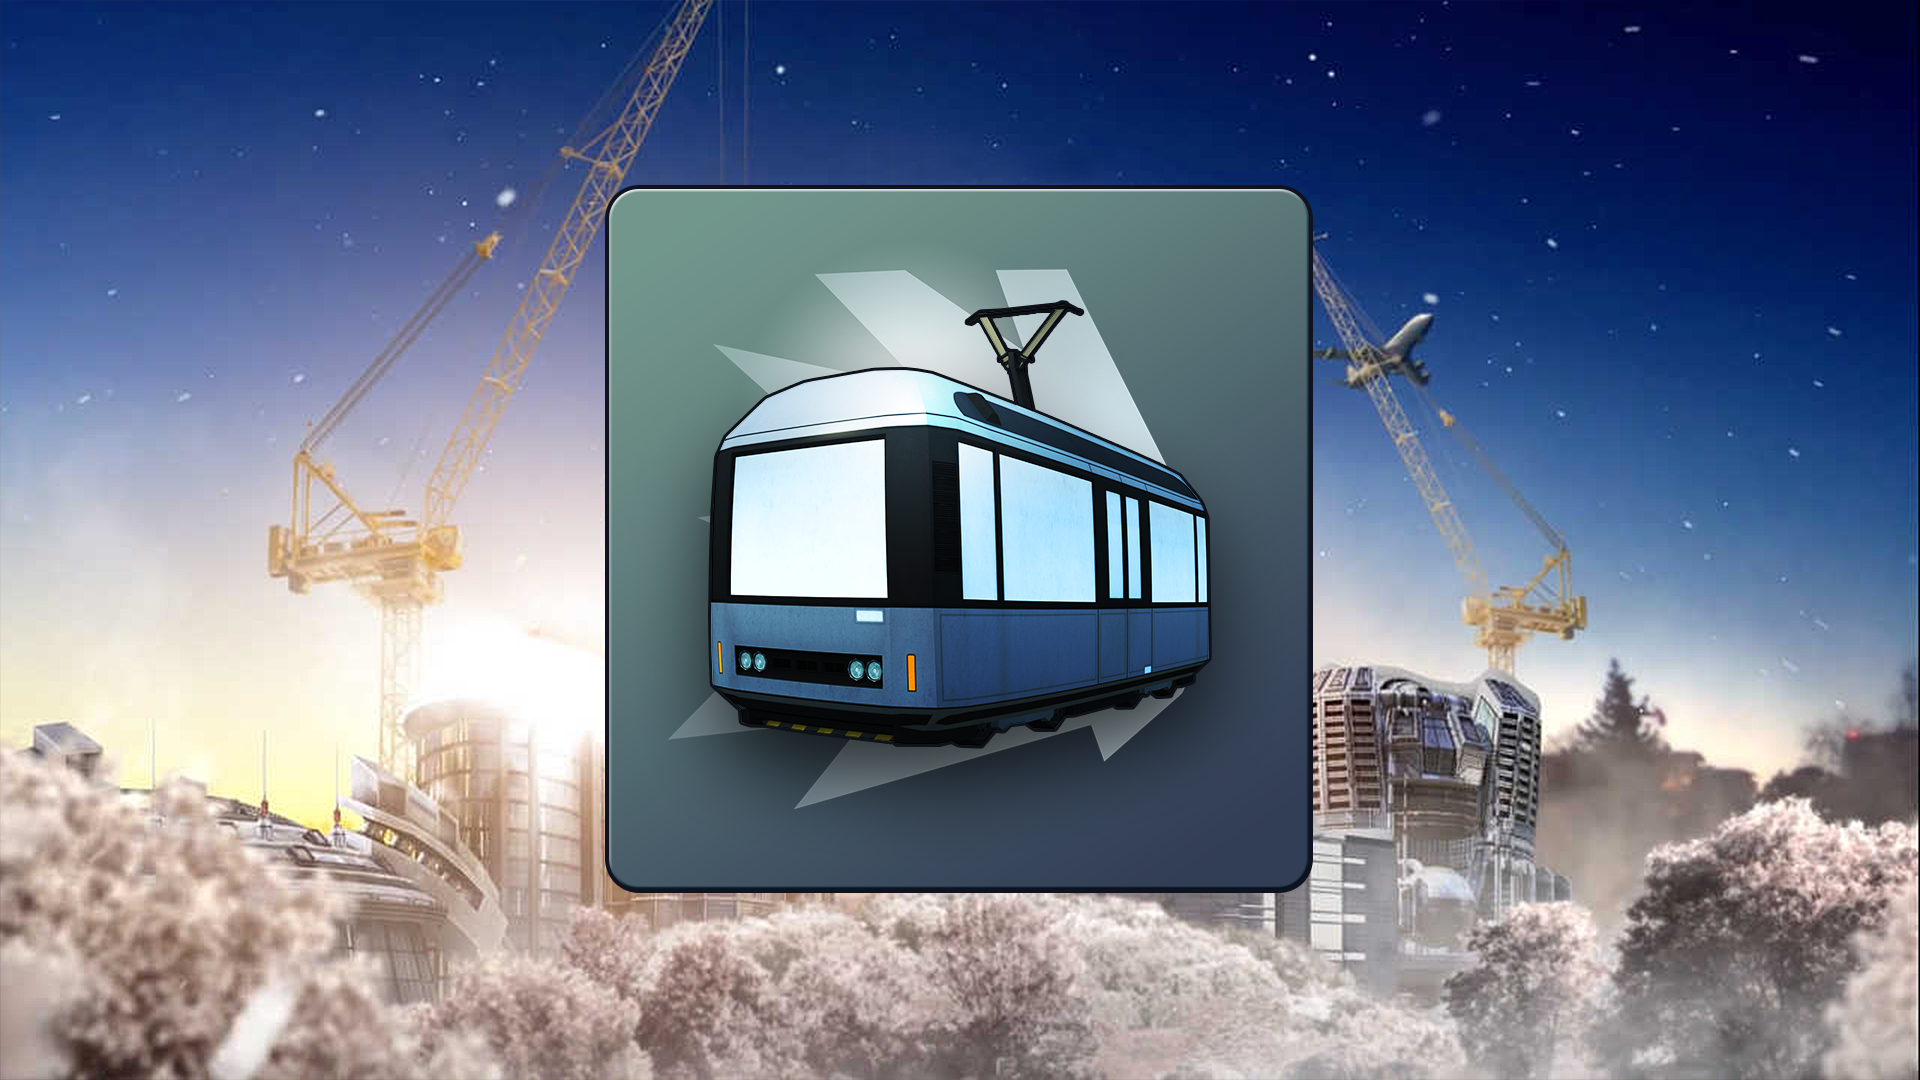 Icon for Here's A Tram